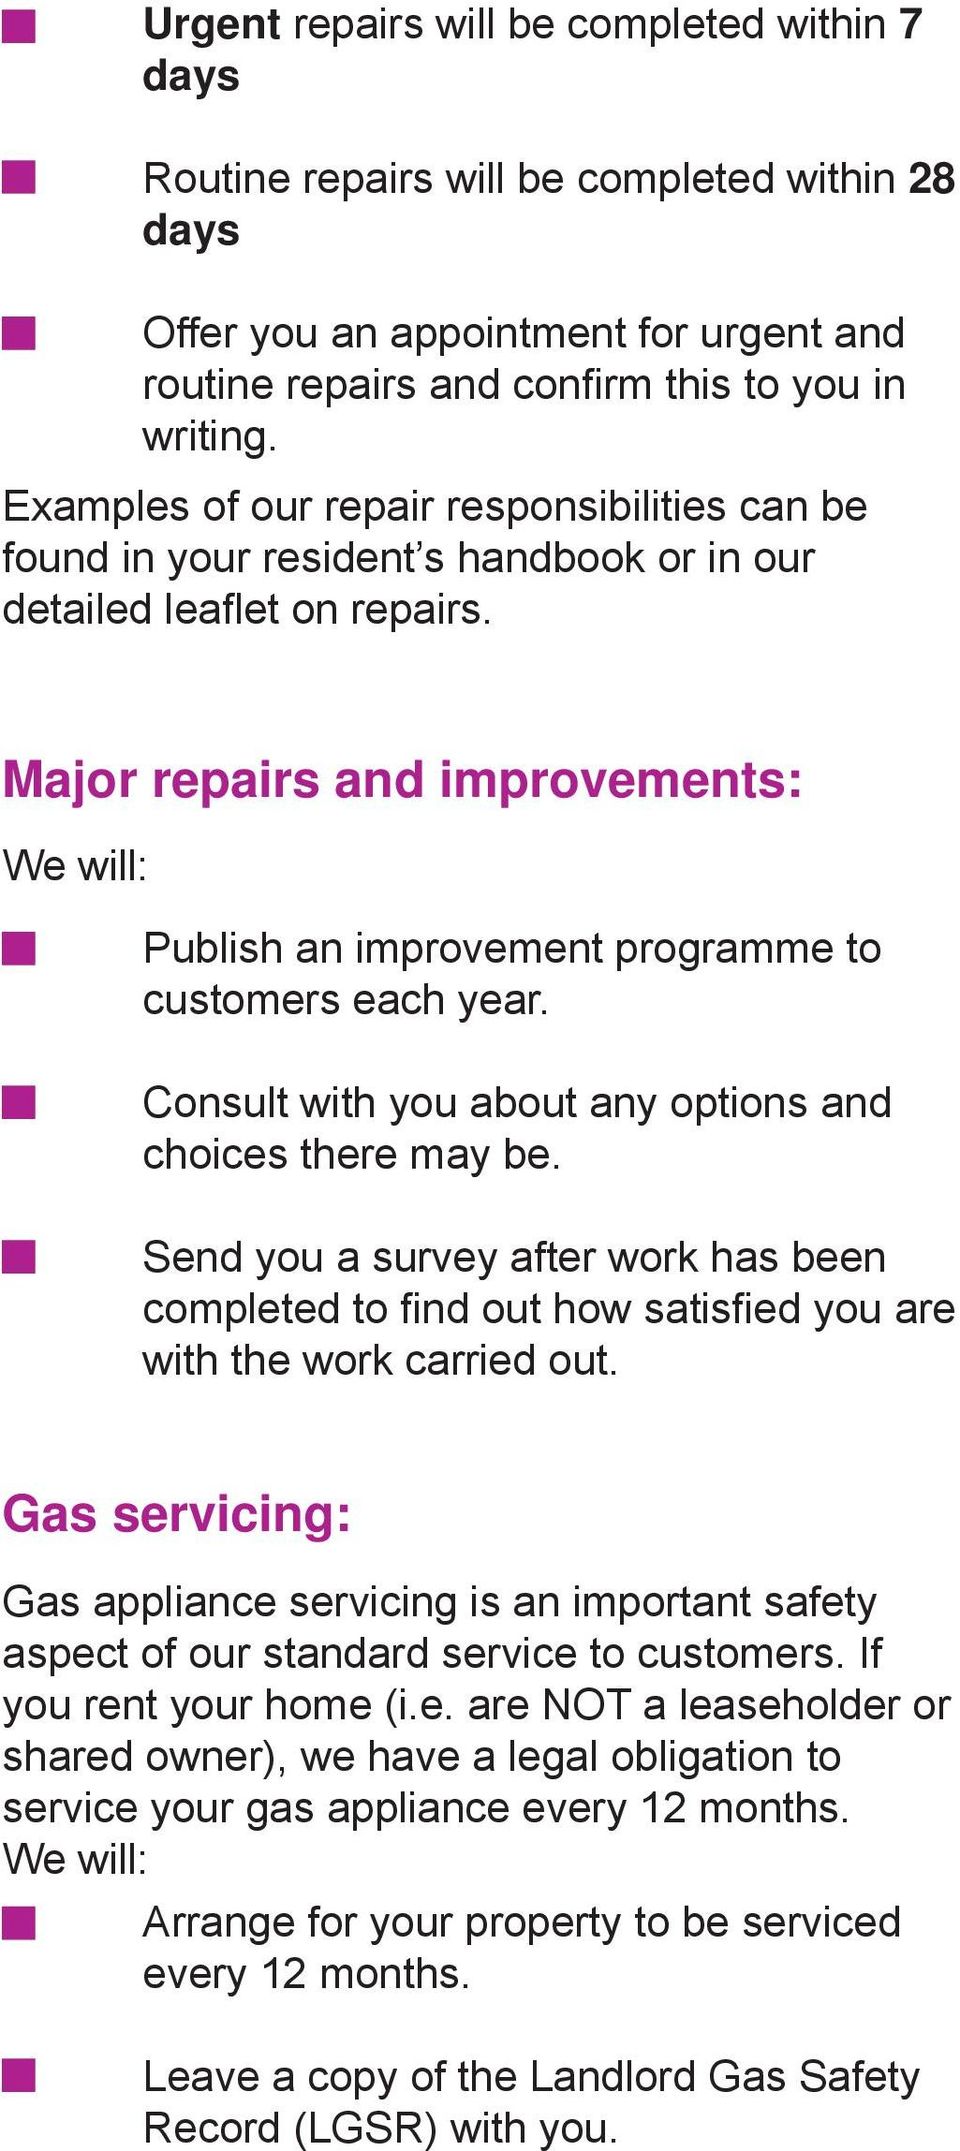 Major repairs and improvements: Publish an improvement programme to customers each year. Consult with you about any options and choices there may be.